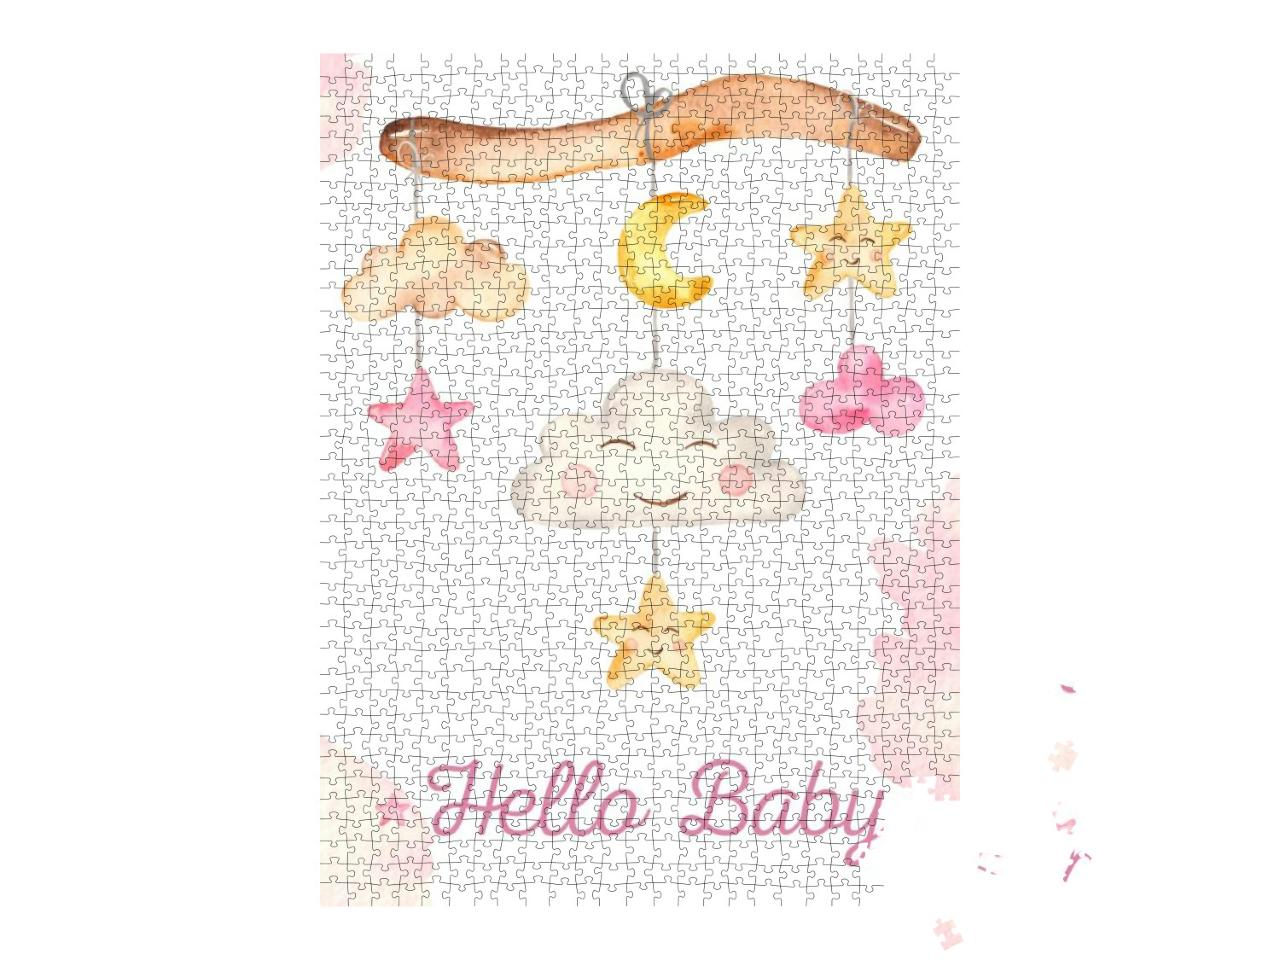 Watercolor Card with Mobile Baby Newborn Cute Girl... Jigsaw Puzzle with 1000 pieces